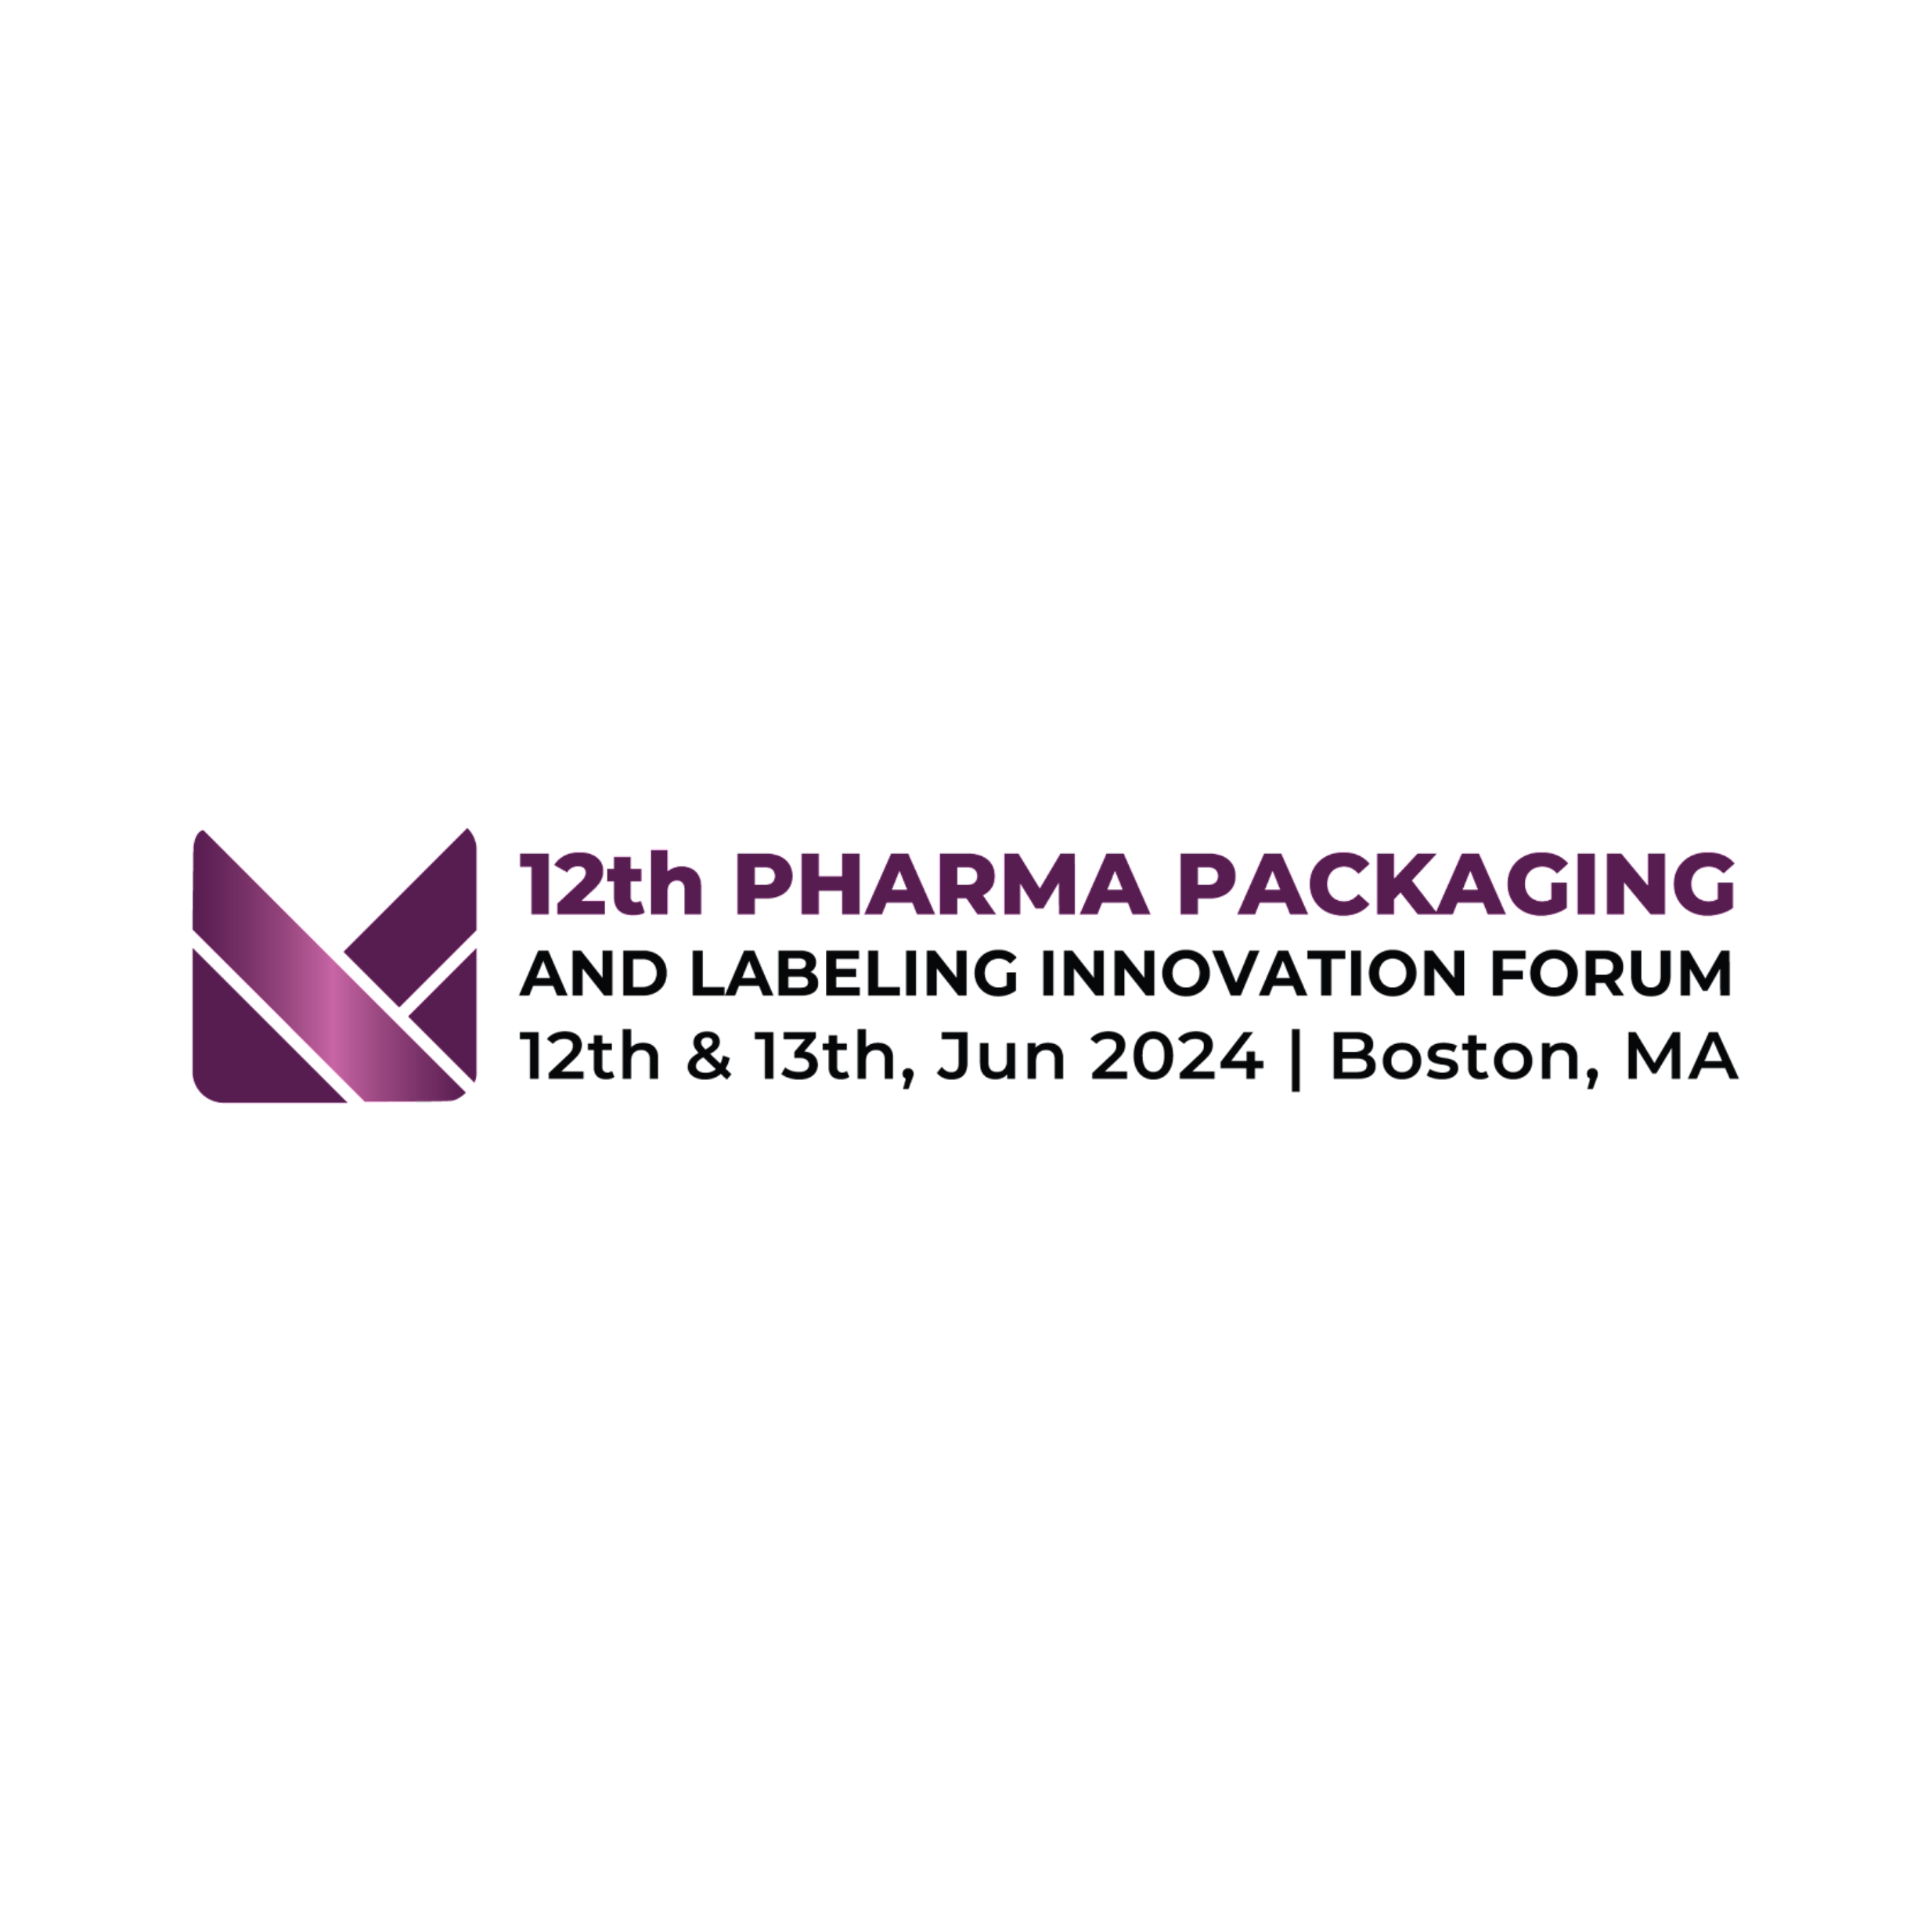 12th Pharma Packaging and Labeling Innovation Forum (USA)